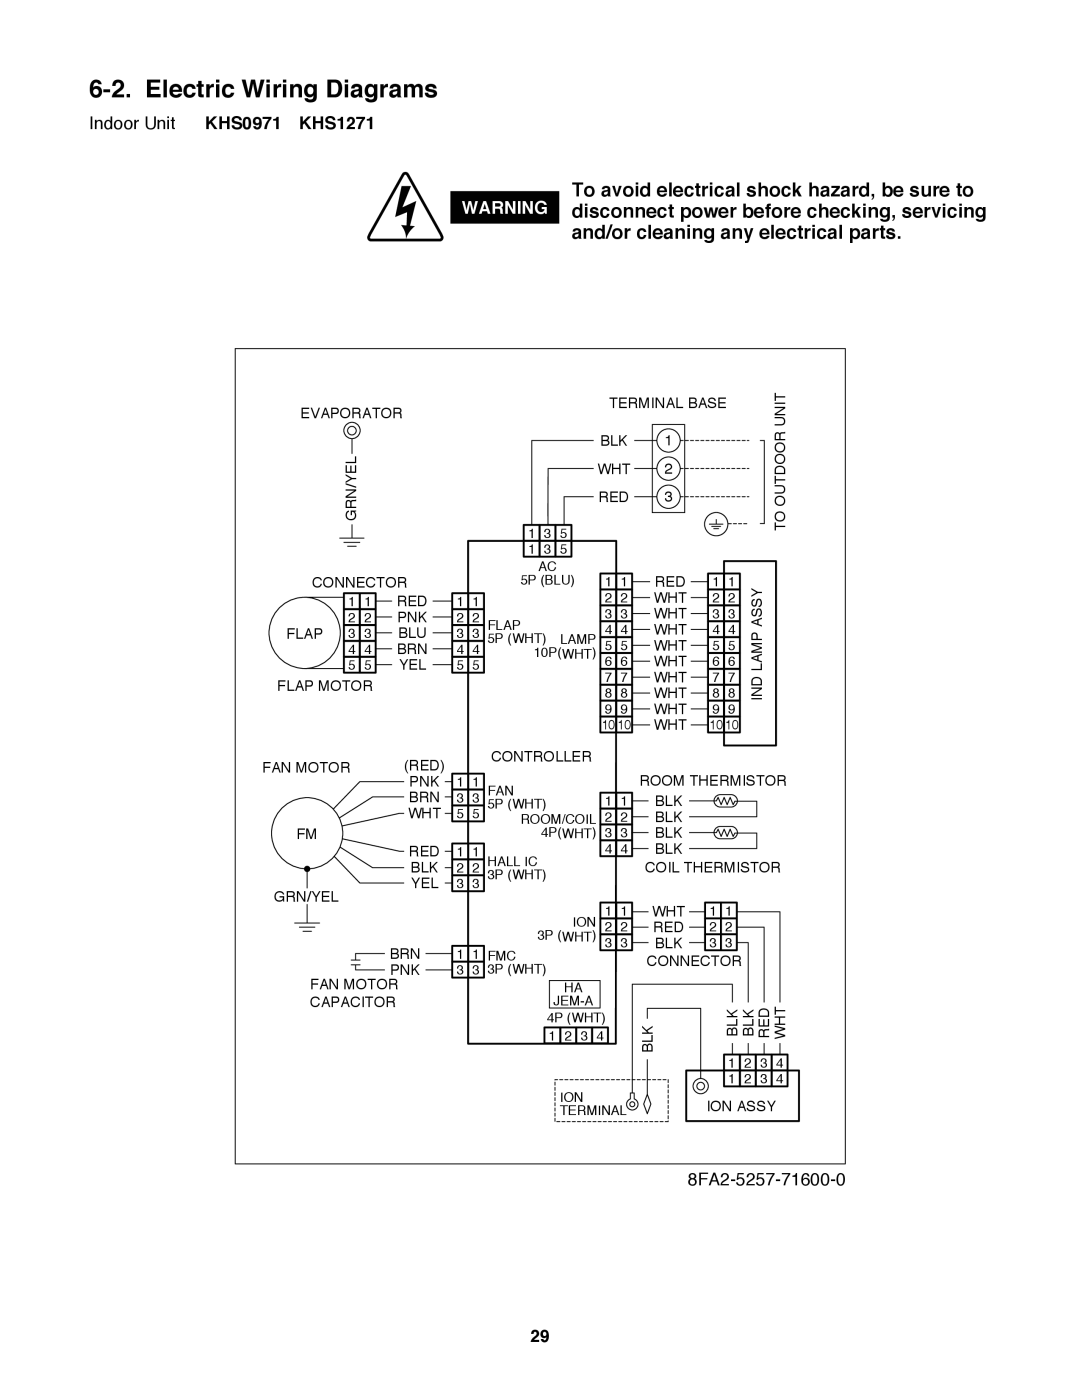 Sanyo CH0971, CH1271 service manual Electric Wiring Diagrams, Indoor Unit KHS0971 KHS1271 